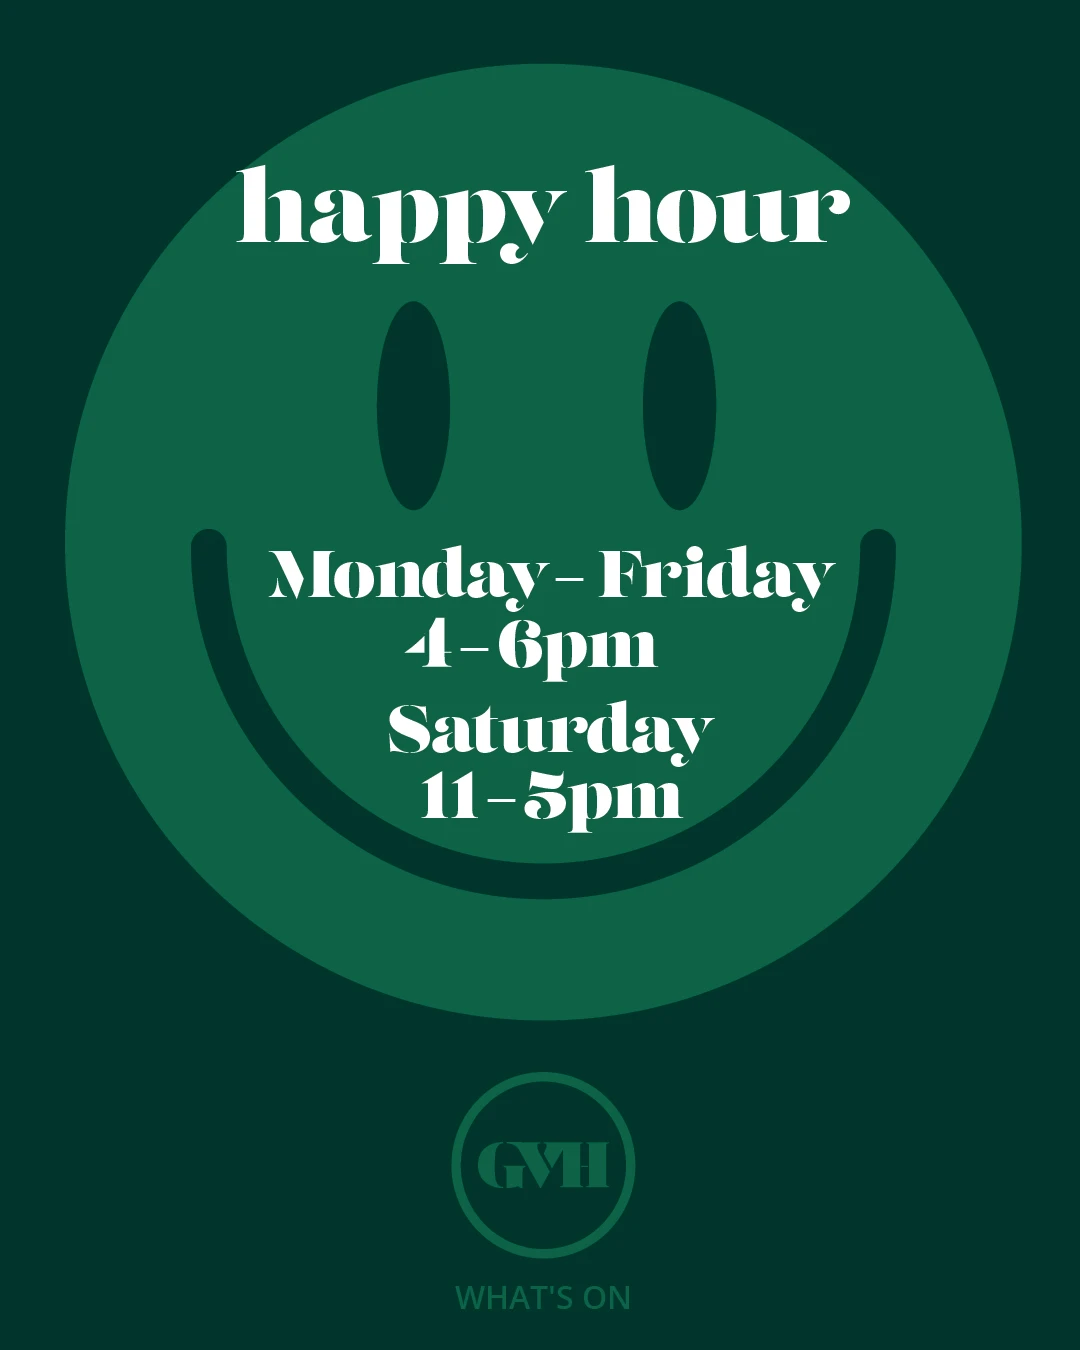 happy hour at the green valley hotel